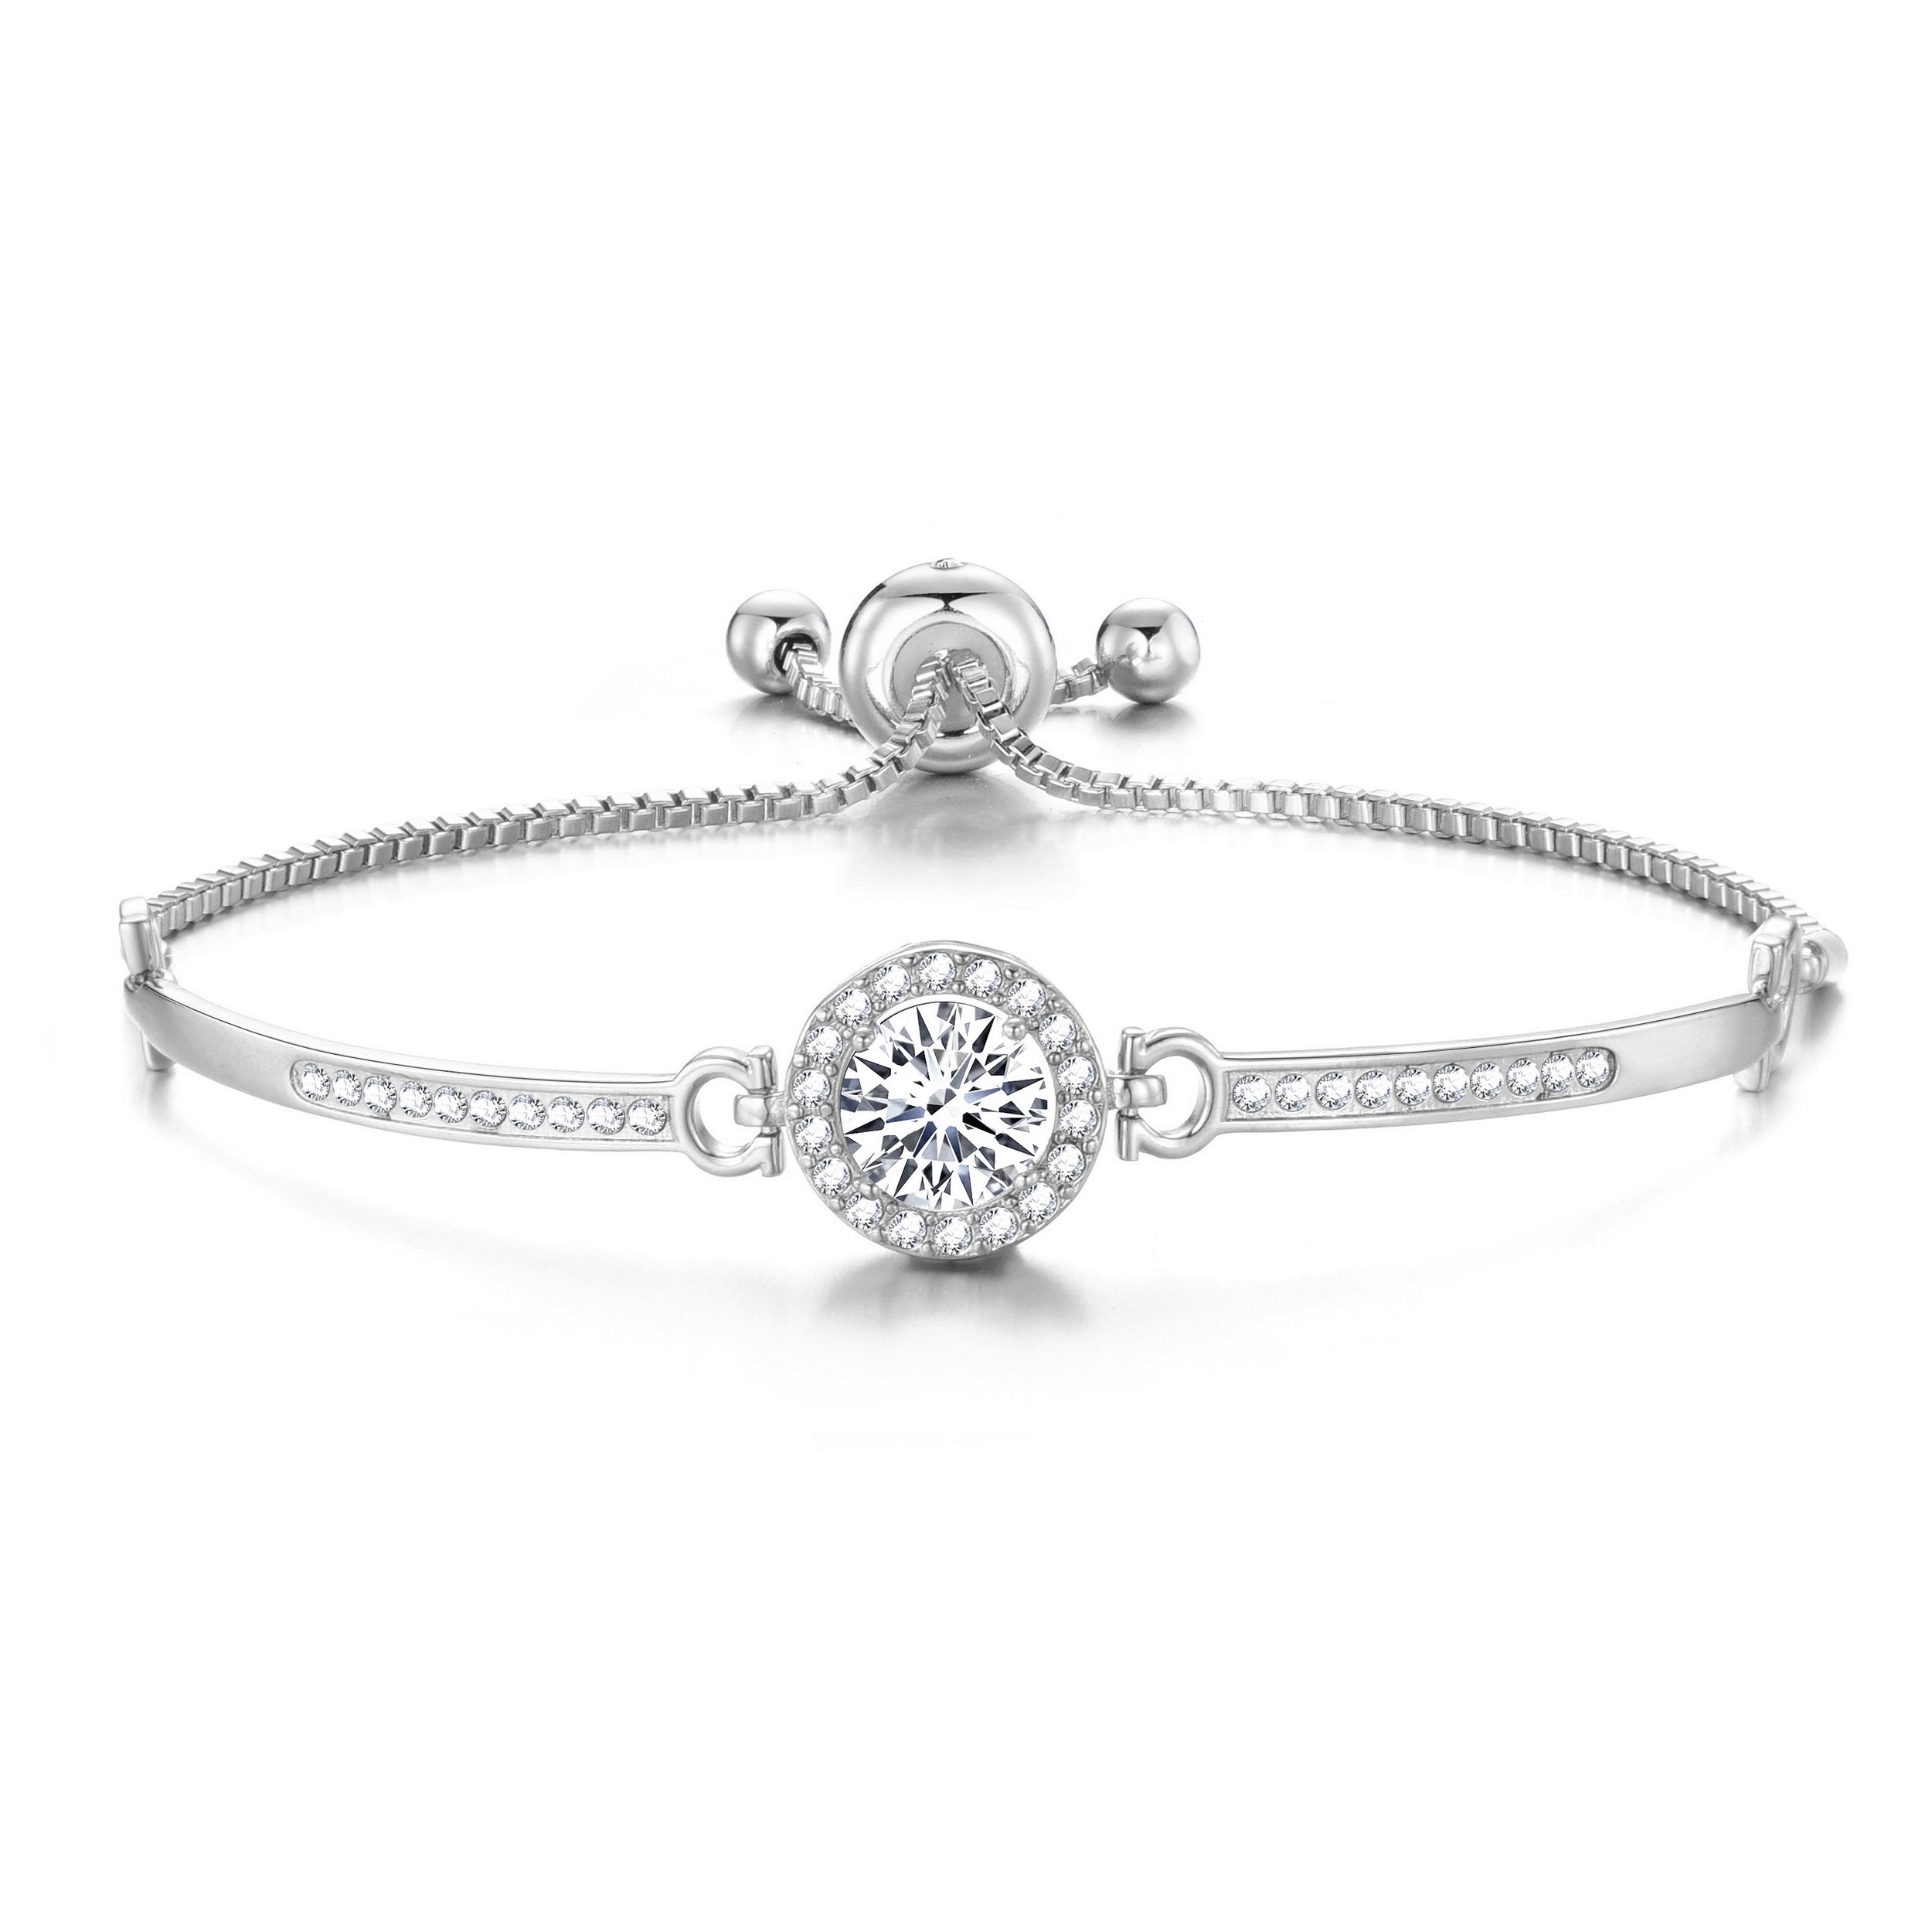 Silver Plated Halo Friendship Bracelet Created with Zircondia® Crystals by Philip Jones Jewellery